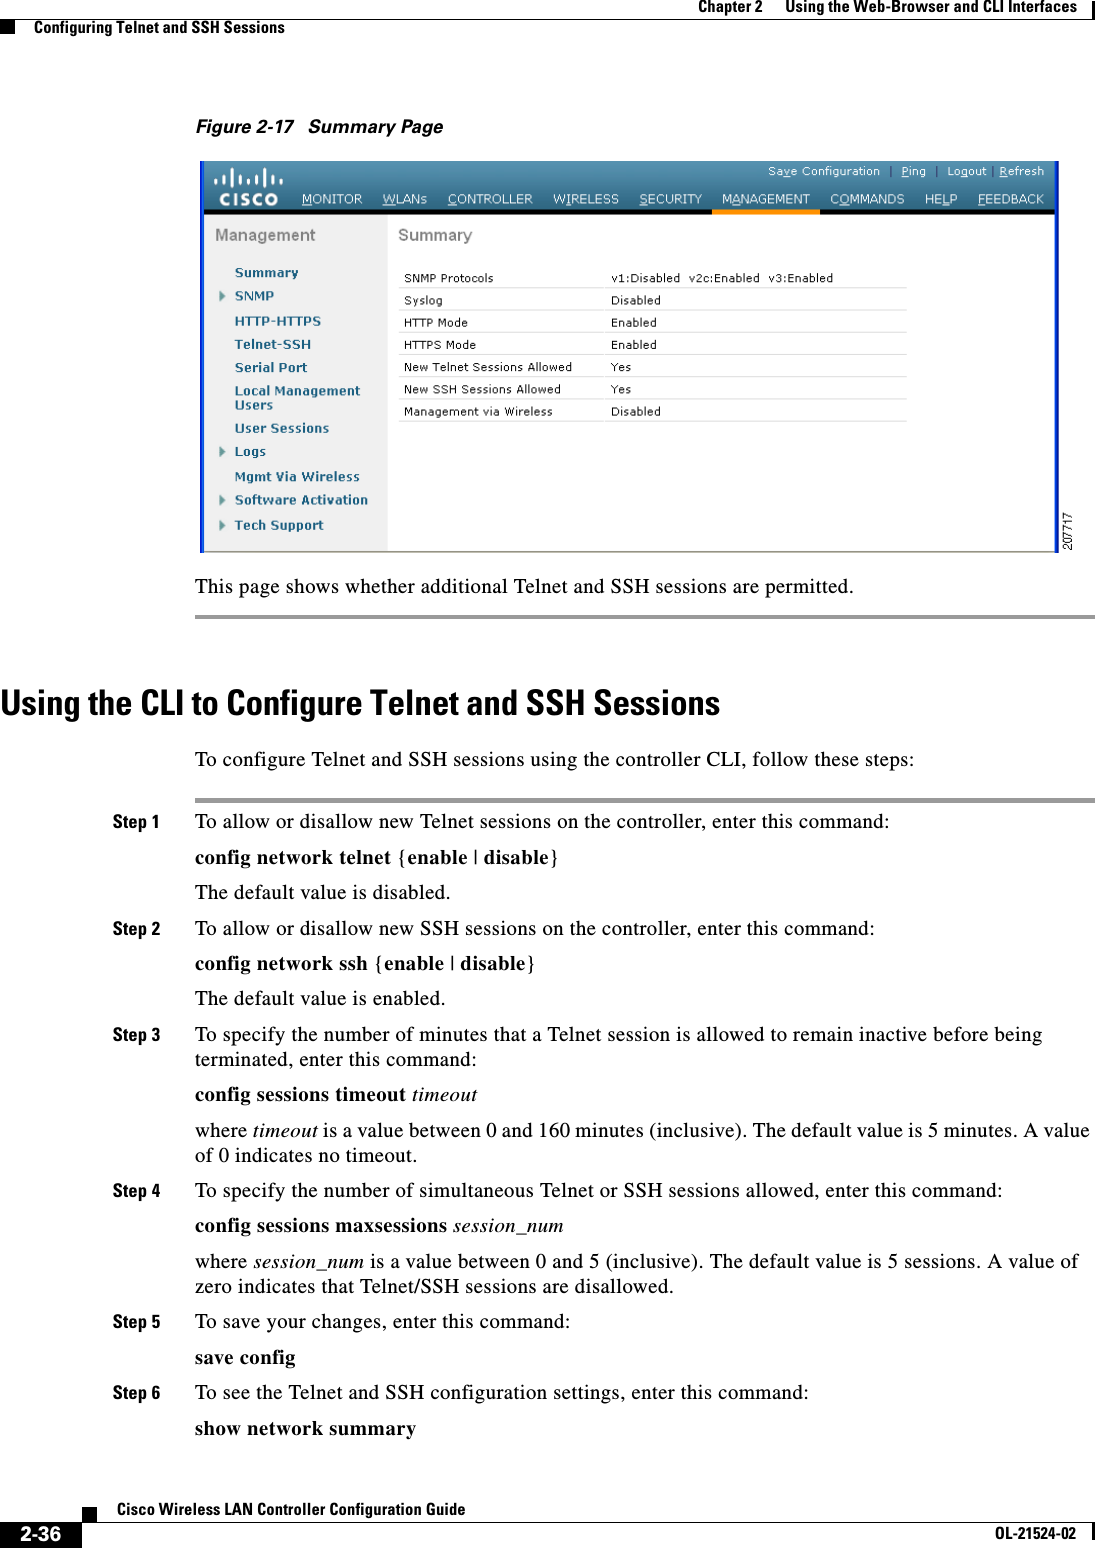  2-36Cisco Wireless LAN Controller Configuration GuideOL-21524-02Chapter 2      Using the Web-Browser and CLI InterfacesConfiguring Telnet and SSH SessionsFigure 2-17 Summary PageThis page shows whether additional Telnet and SSH sessions are permitted.Using the CLI to Configure Telnet and SSH SessionsTo configure Telnet and SSH sessions using the controller CLI, follow these steps:Step 1 To allow or disallow new Telnet sessions on the controller, enter this command:config network telnet {enable | disable}The default value is disabled.Step 2 To allow or disallow new SSH sessions on the controller, enter this command:config network ssh {enable | disable}The default value is enabled.Step 3 To specify the number of minutes that a Telnet session is allowed to remain inactive before being terminated, enter this command:config sessions timeout timeoutwhere timeout is a value between 0 and 160 minutes (inclusive). The default value is 5 minutes. A value of 0 indicates no timeout.Step 4 To specify the number of simultaneous Telnet or SSH sessions allowed, enter this command:config sessions maxsessions session_numwhere session_num is a value between 0 and 5 (inclusive). The default value is 5 sessions. A value of zero indicates that Telnet/SSH sessions are disallowed.Step 5 To save your changes, enter this command:save configStep 6 To see the Telnet and SSH configuration settings, enter this command:show network summary